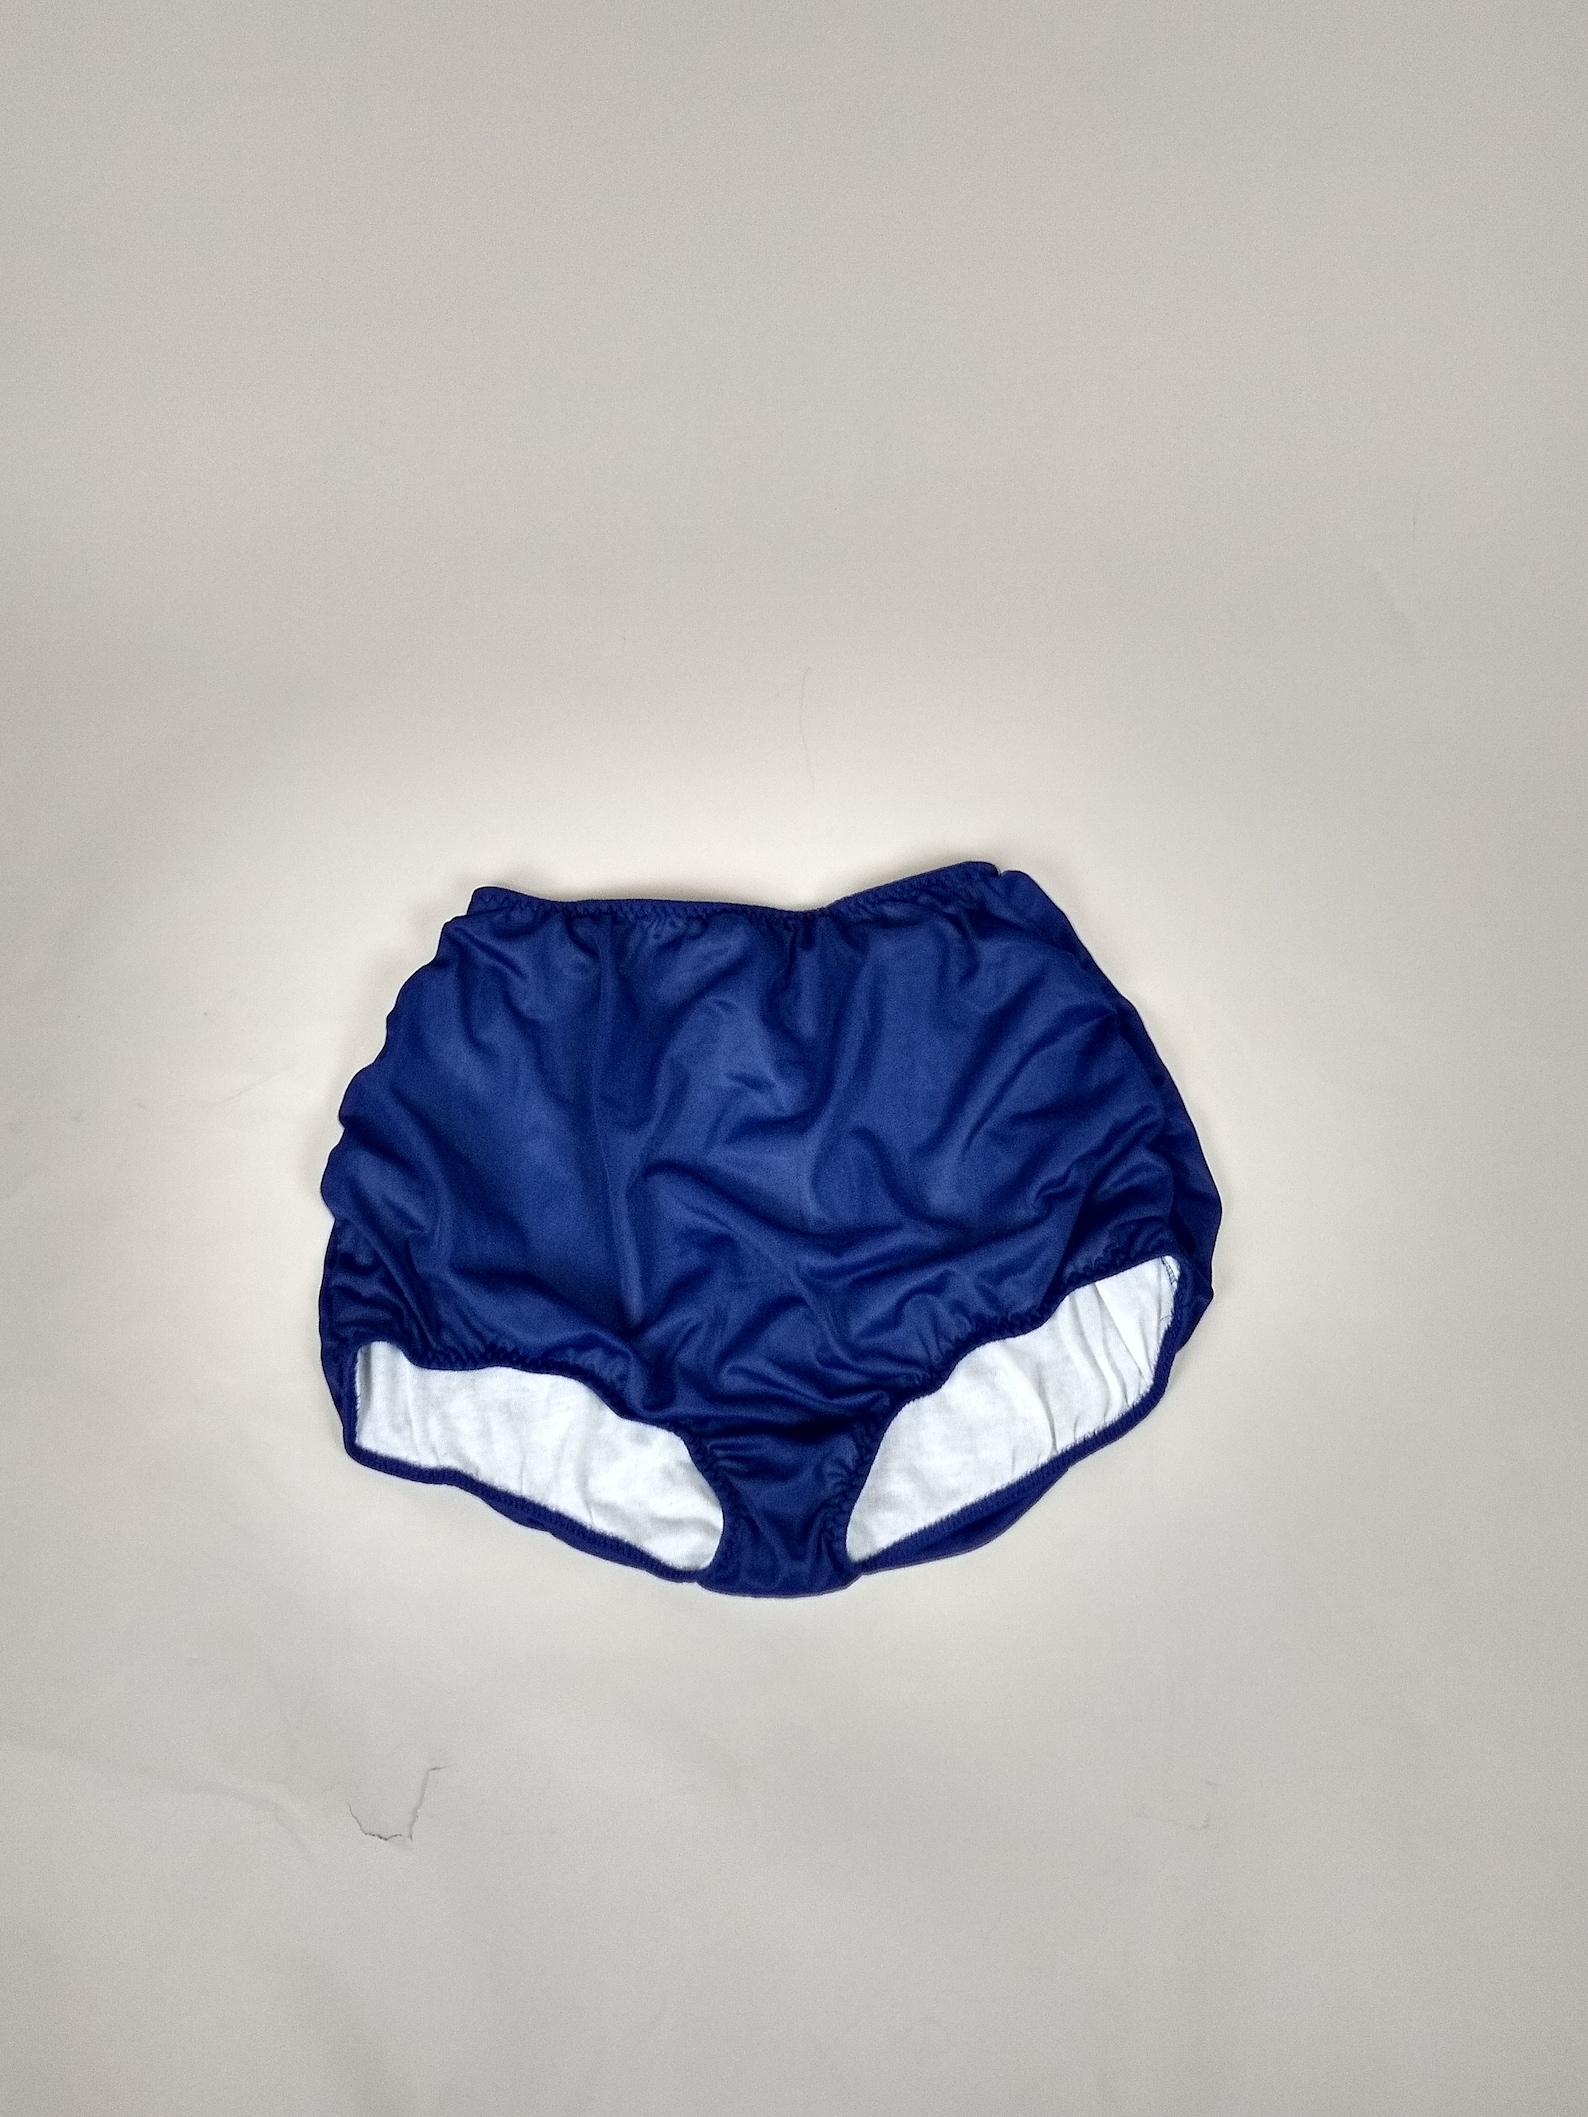 Vintage Blue Nylon Panties Briefs Knickers Full Cotton Lined 70s ...